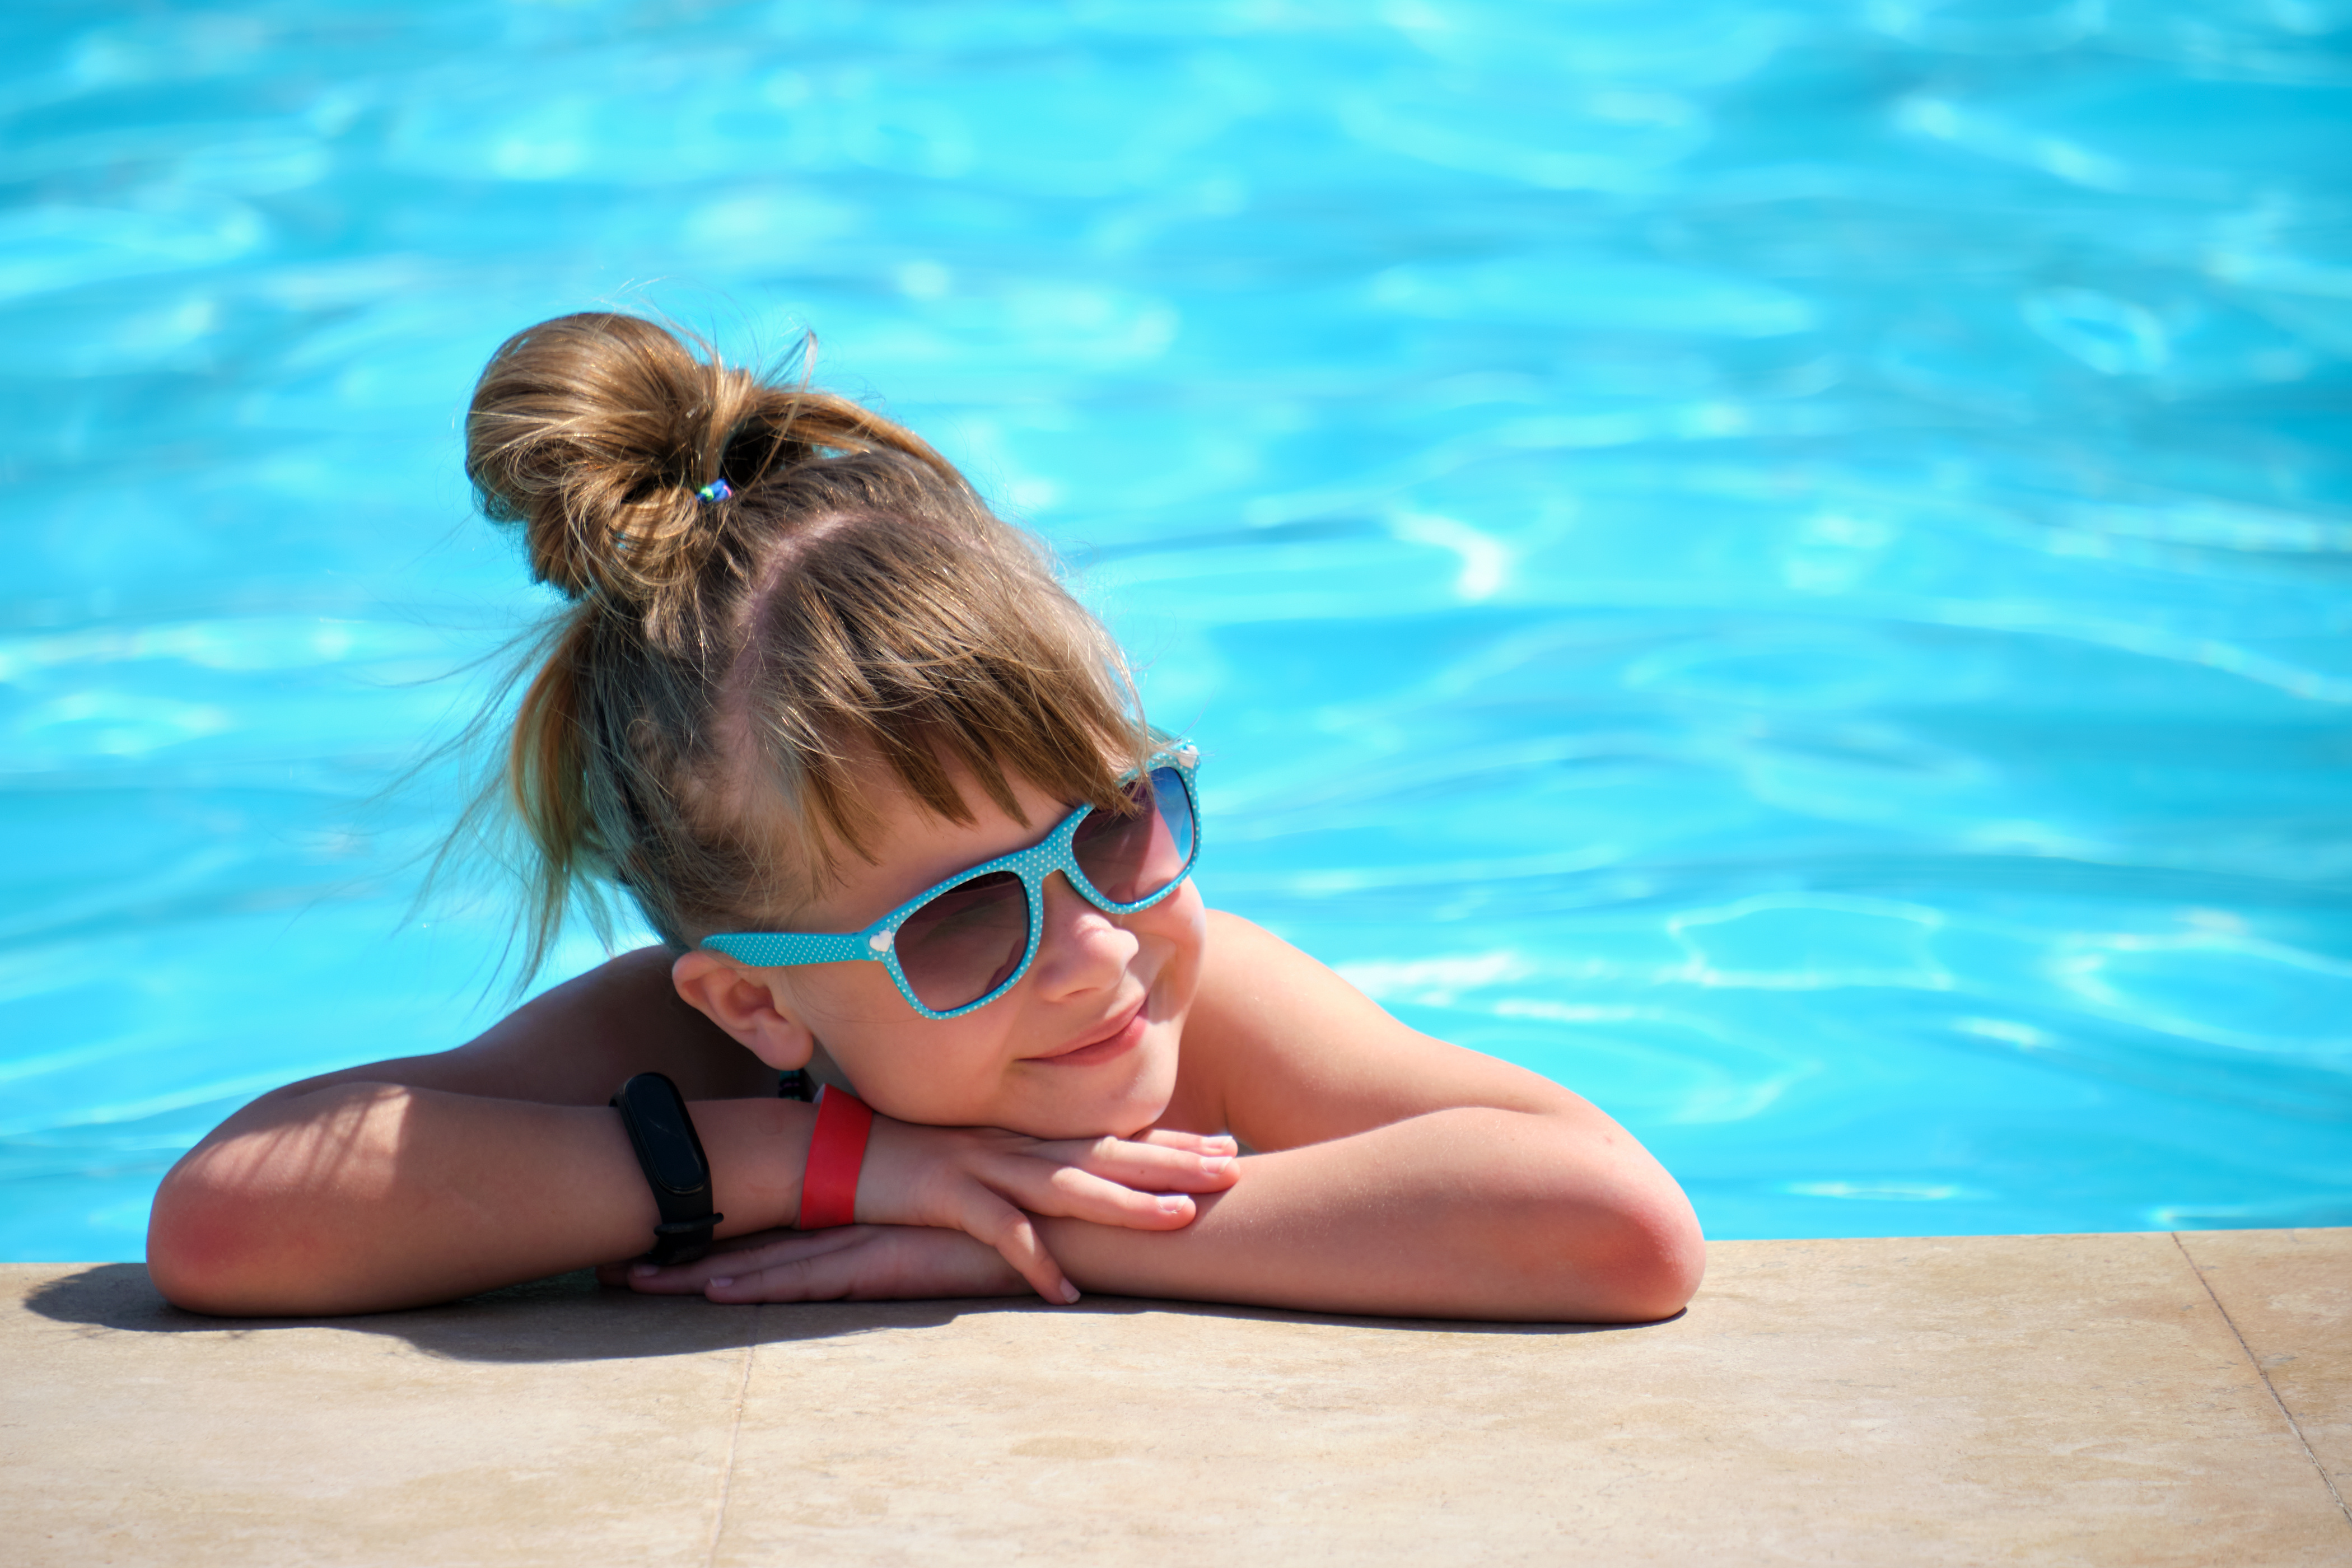 Young joyful child girl resting on swimming pool side with clear blue water on sunny summer day. Tropical vacations concept.